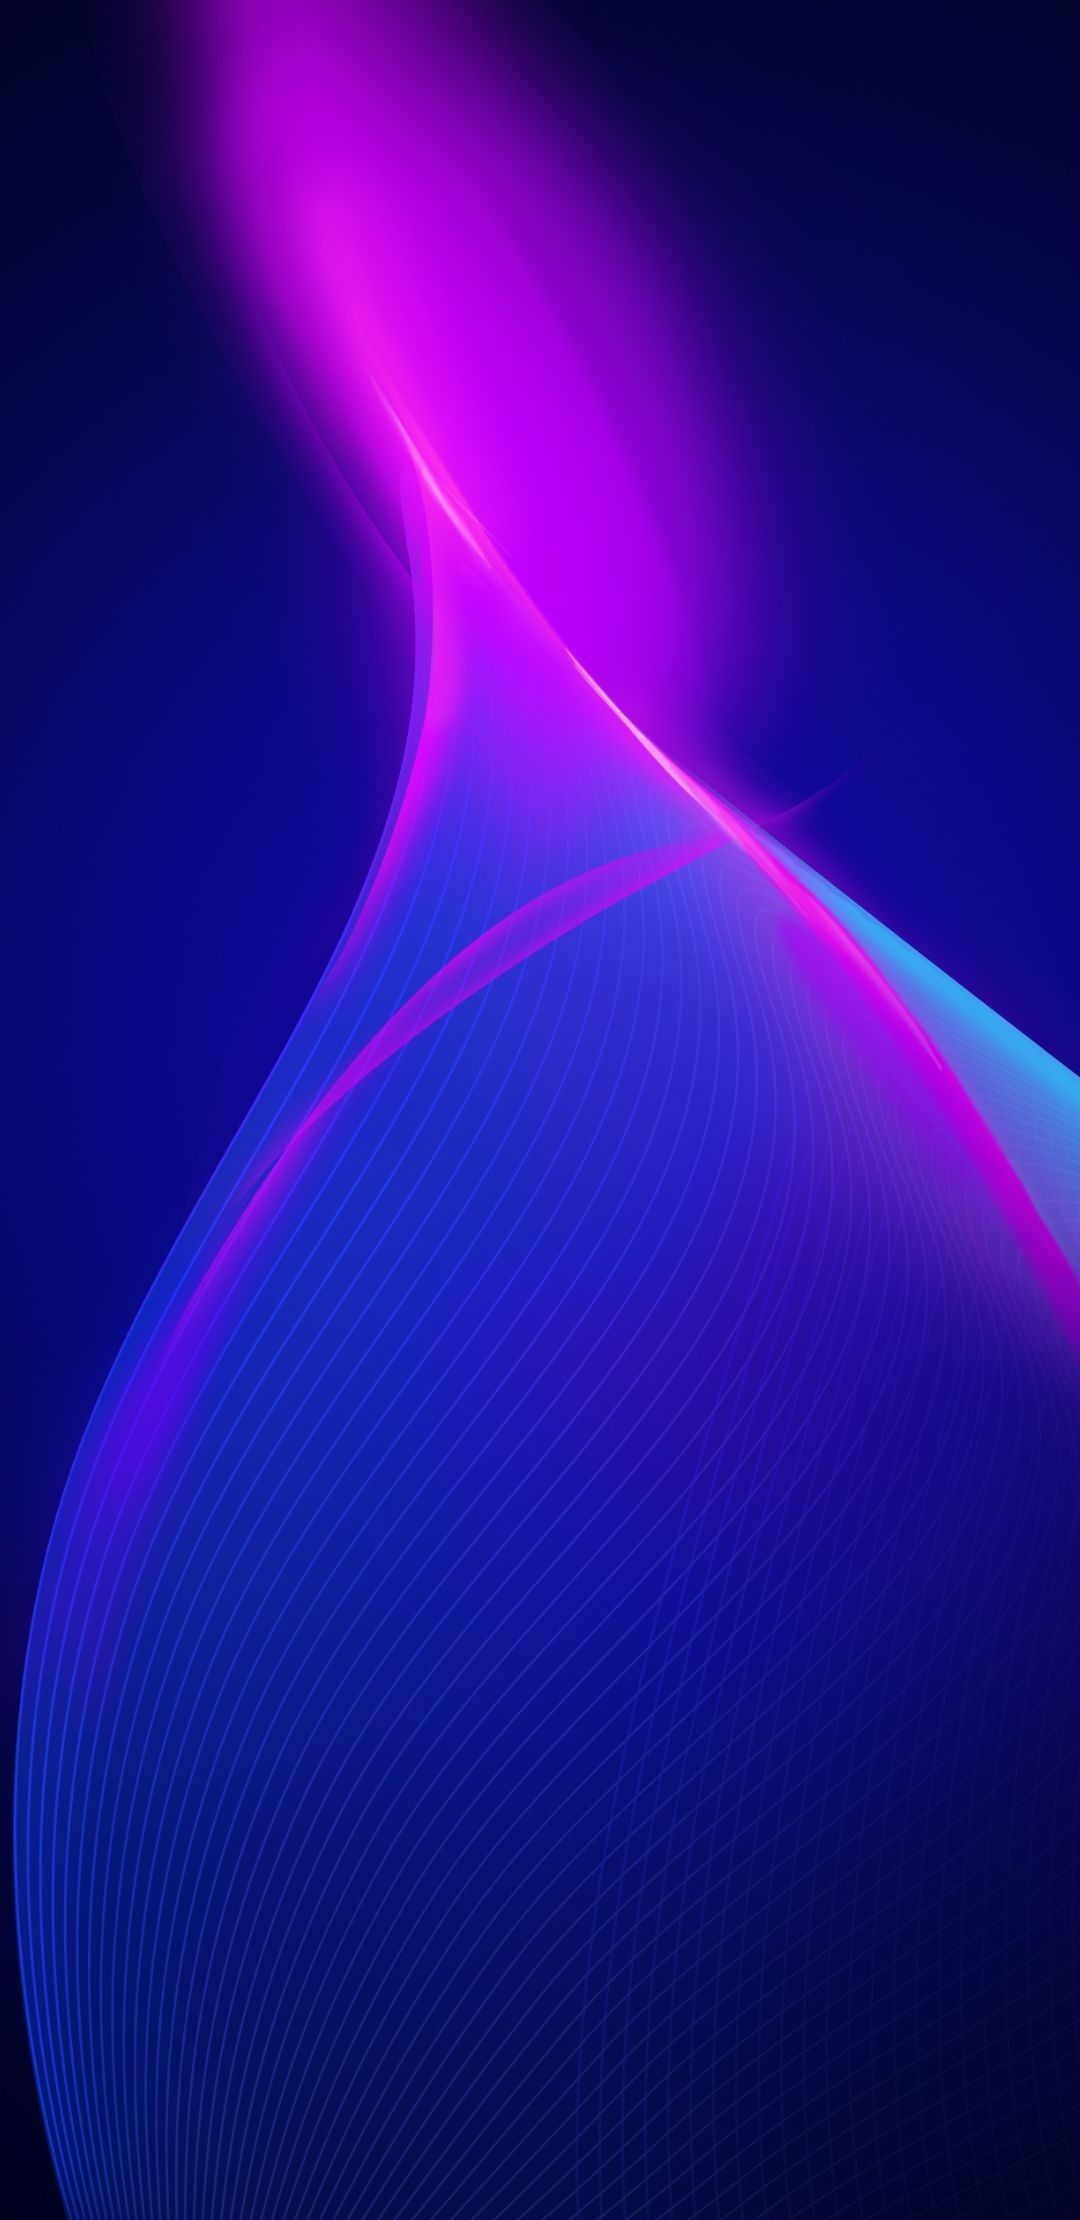 T-Mobile Wallpapers - Wallpaper Cave